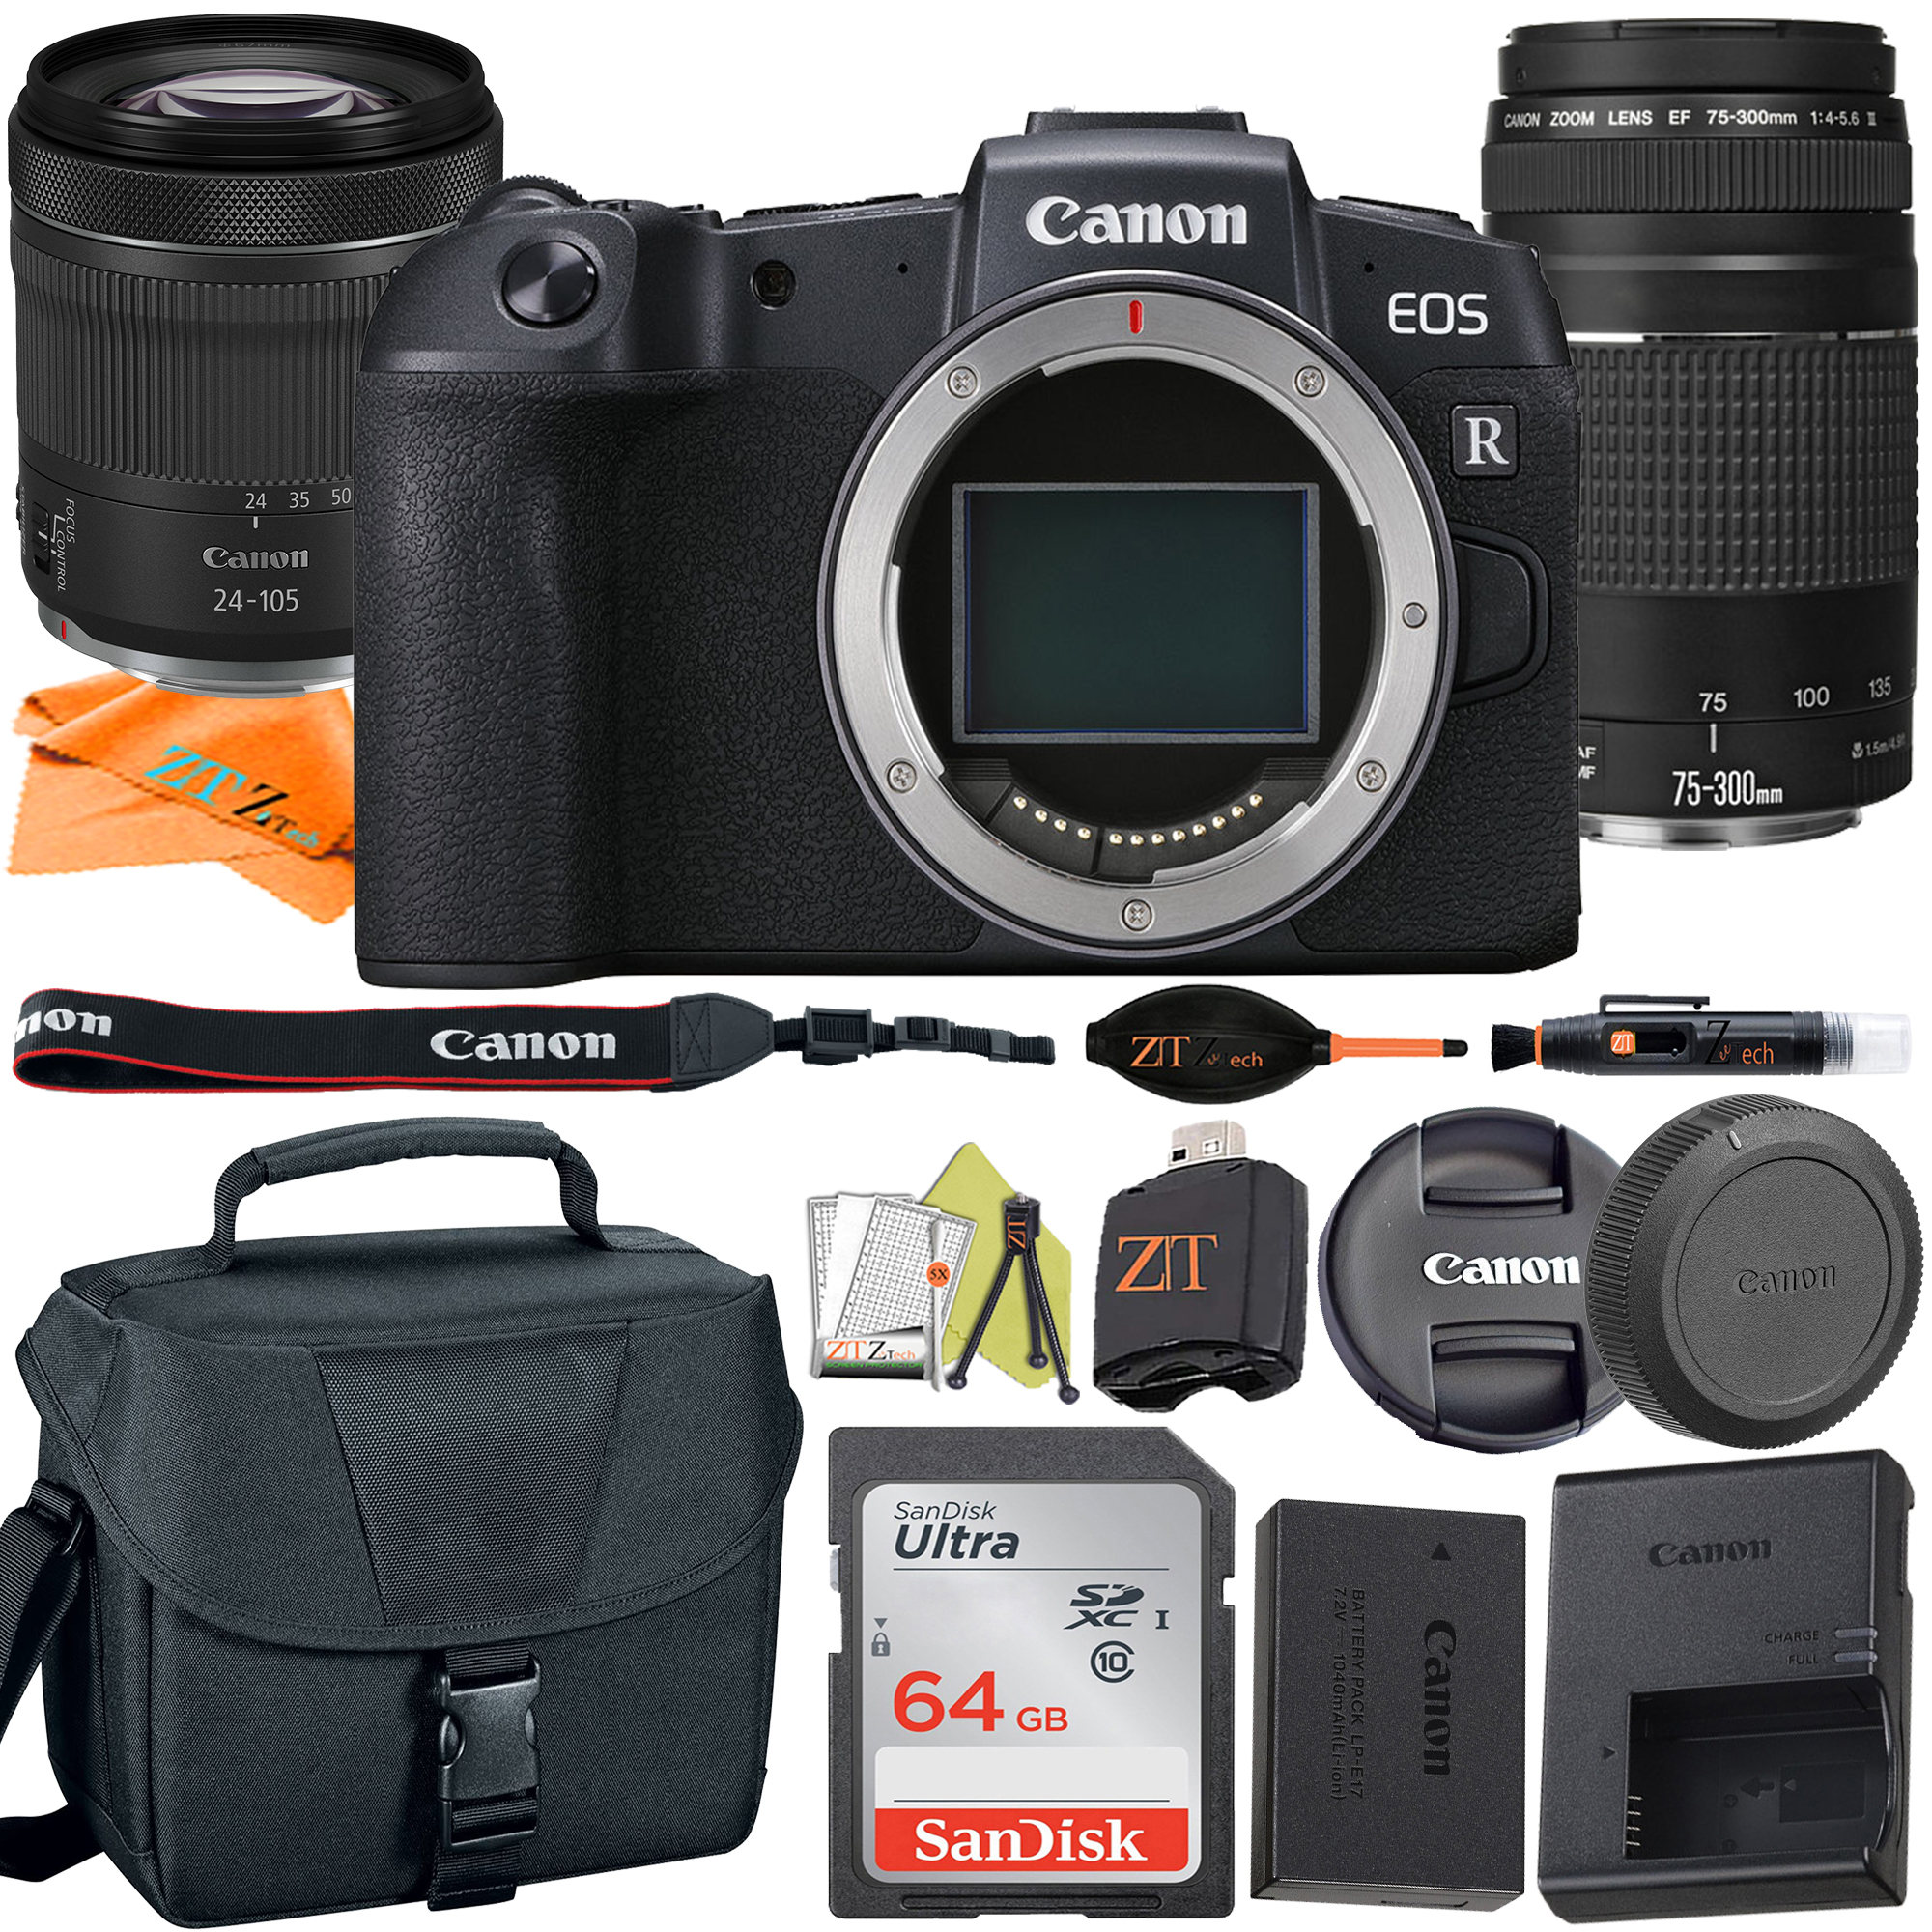 Canon EOS RP Mirrorless Digital Camera with RF24-105mm STM + 75-300mm Lens + SanDisk 64GB + Case + ZeeTech Accessory